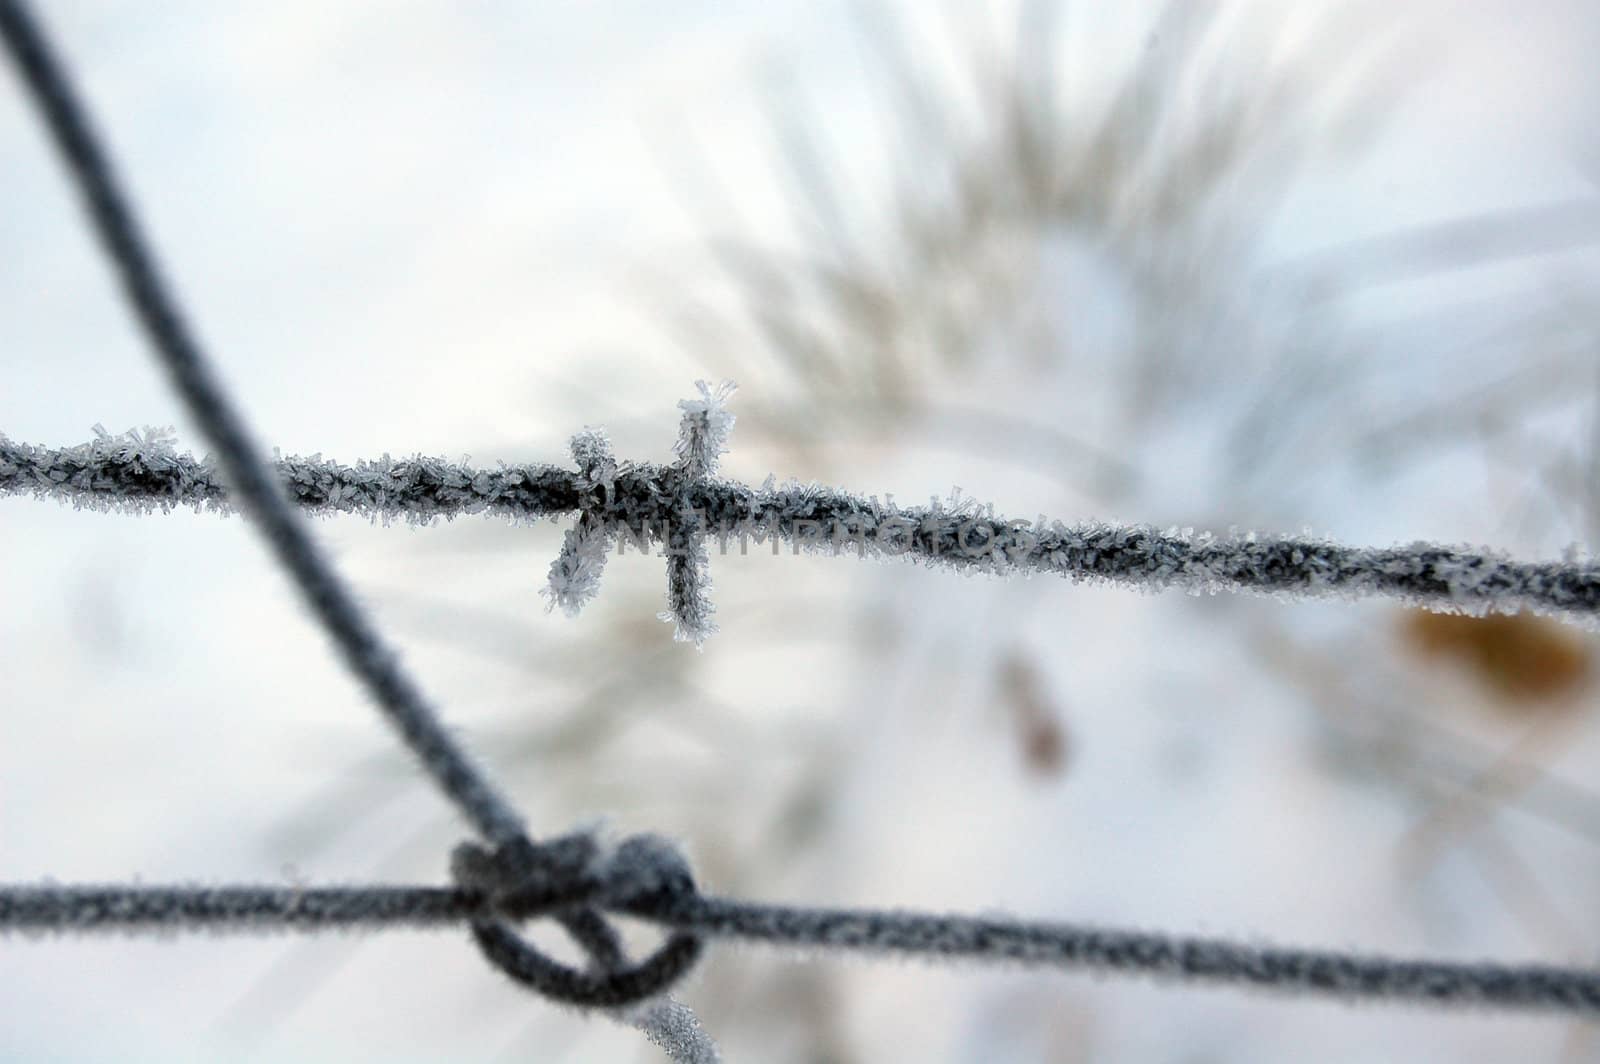 frozen barbwire by mojly